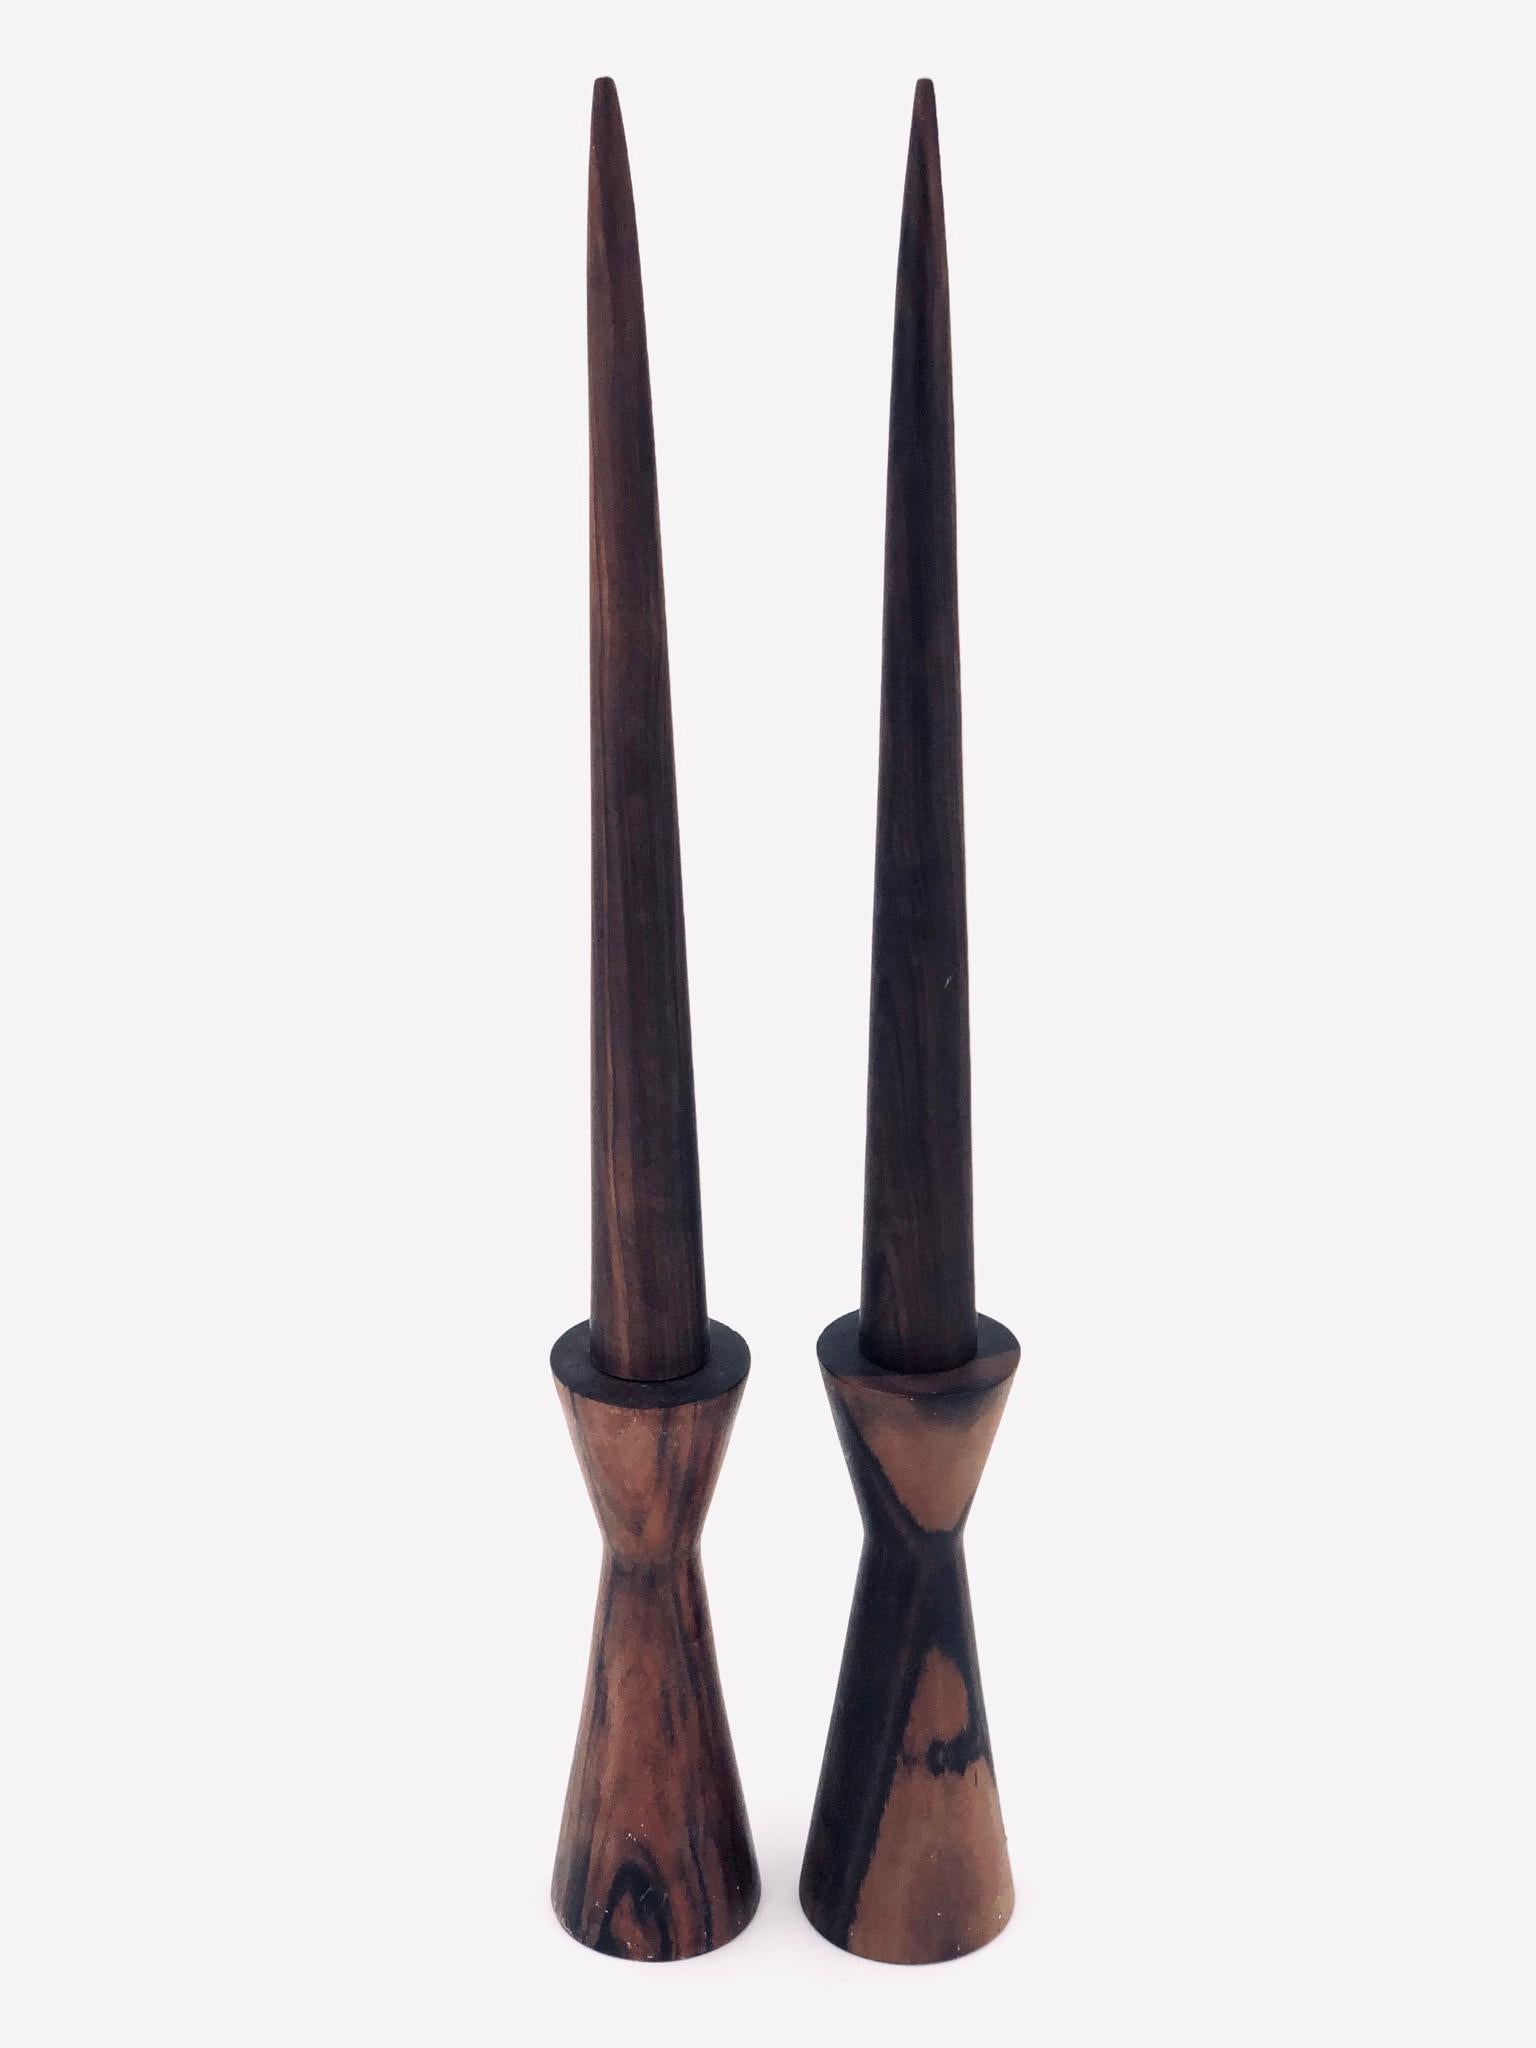 Beautiful pair of solid rosewood hand-turned candle sticks, circa 1970s nice condition with fake solid rosewood candles nice weight and condition.